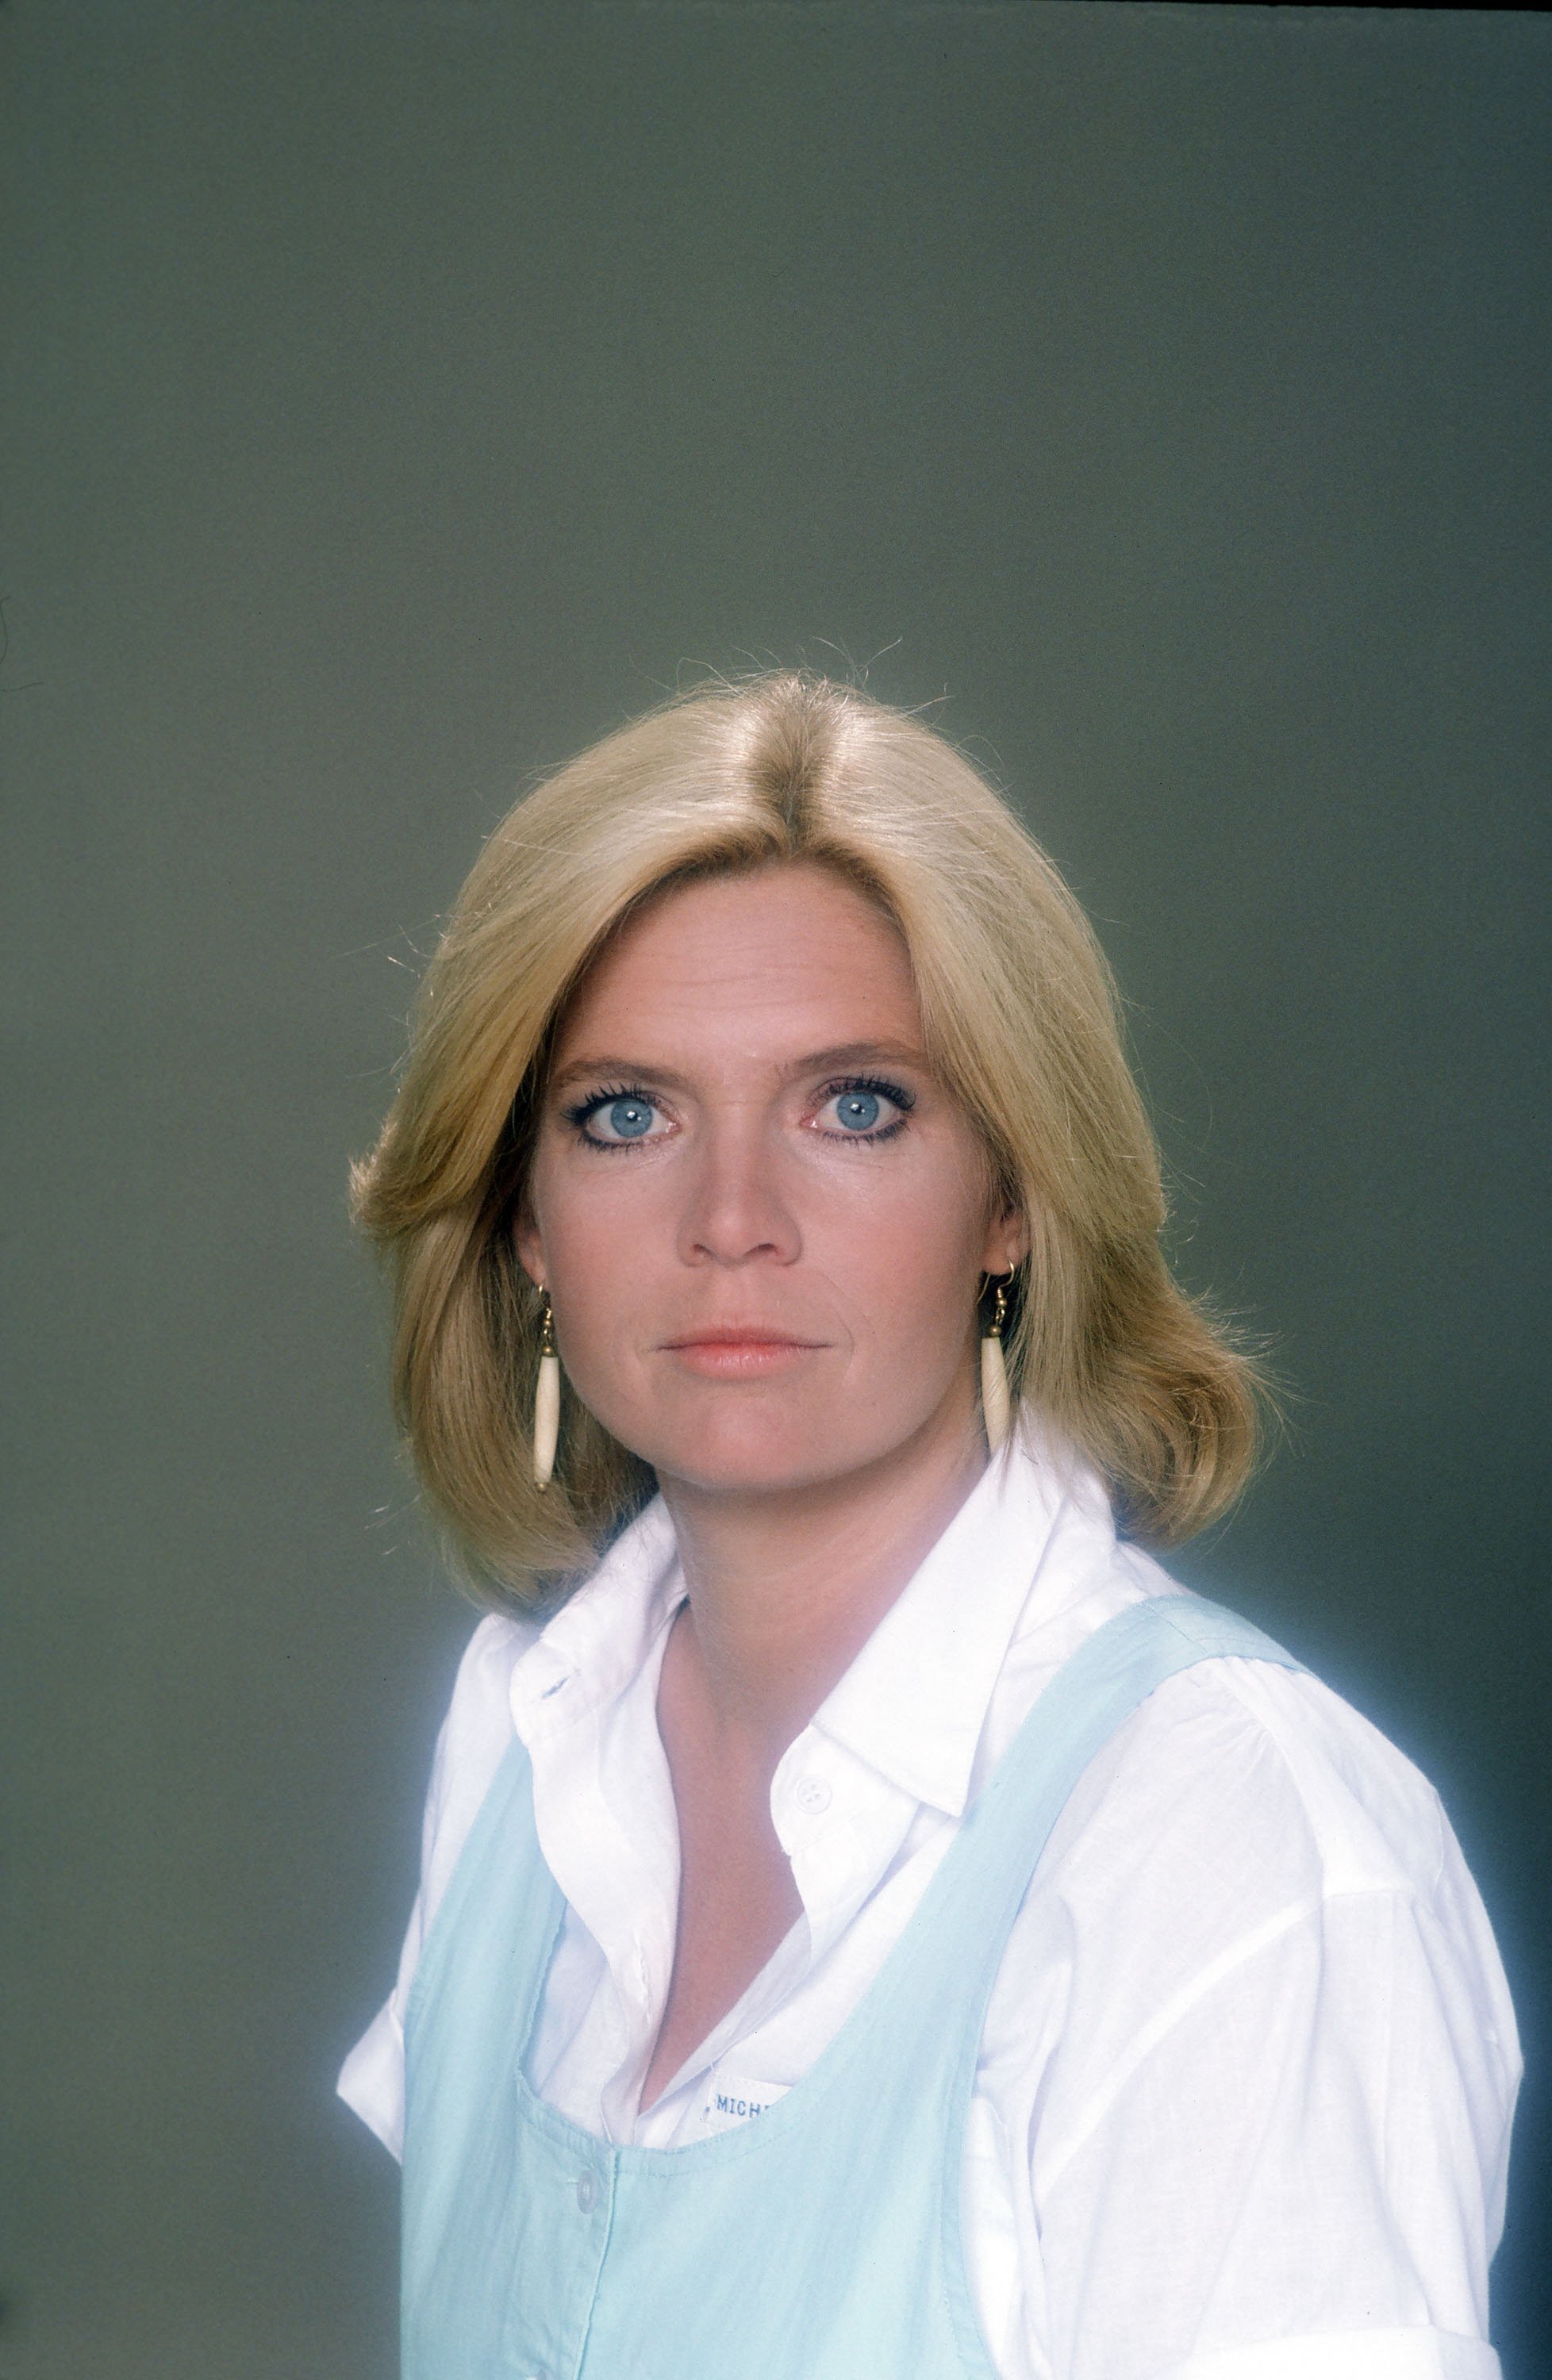 Meredith Baxter as Elyse Keaton in season three of "Family Ties." | Photo: Getty Images